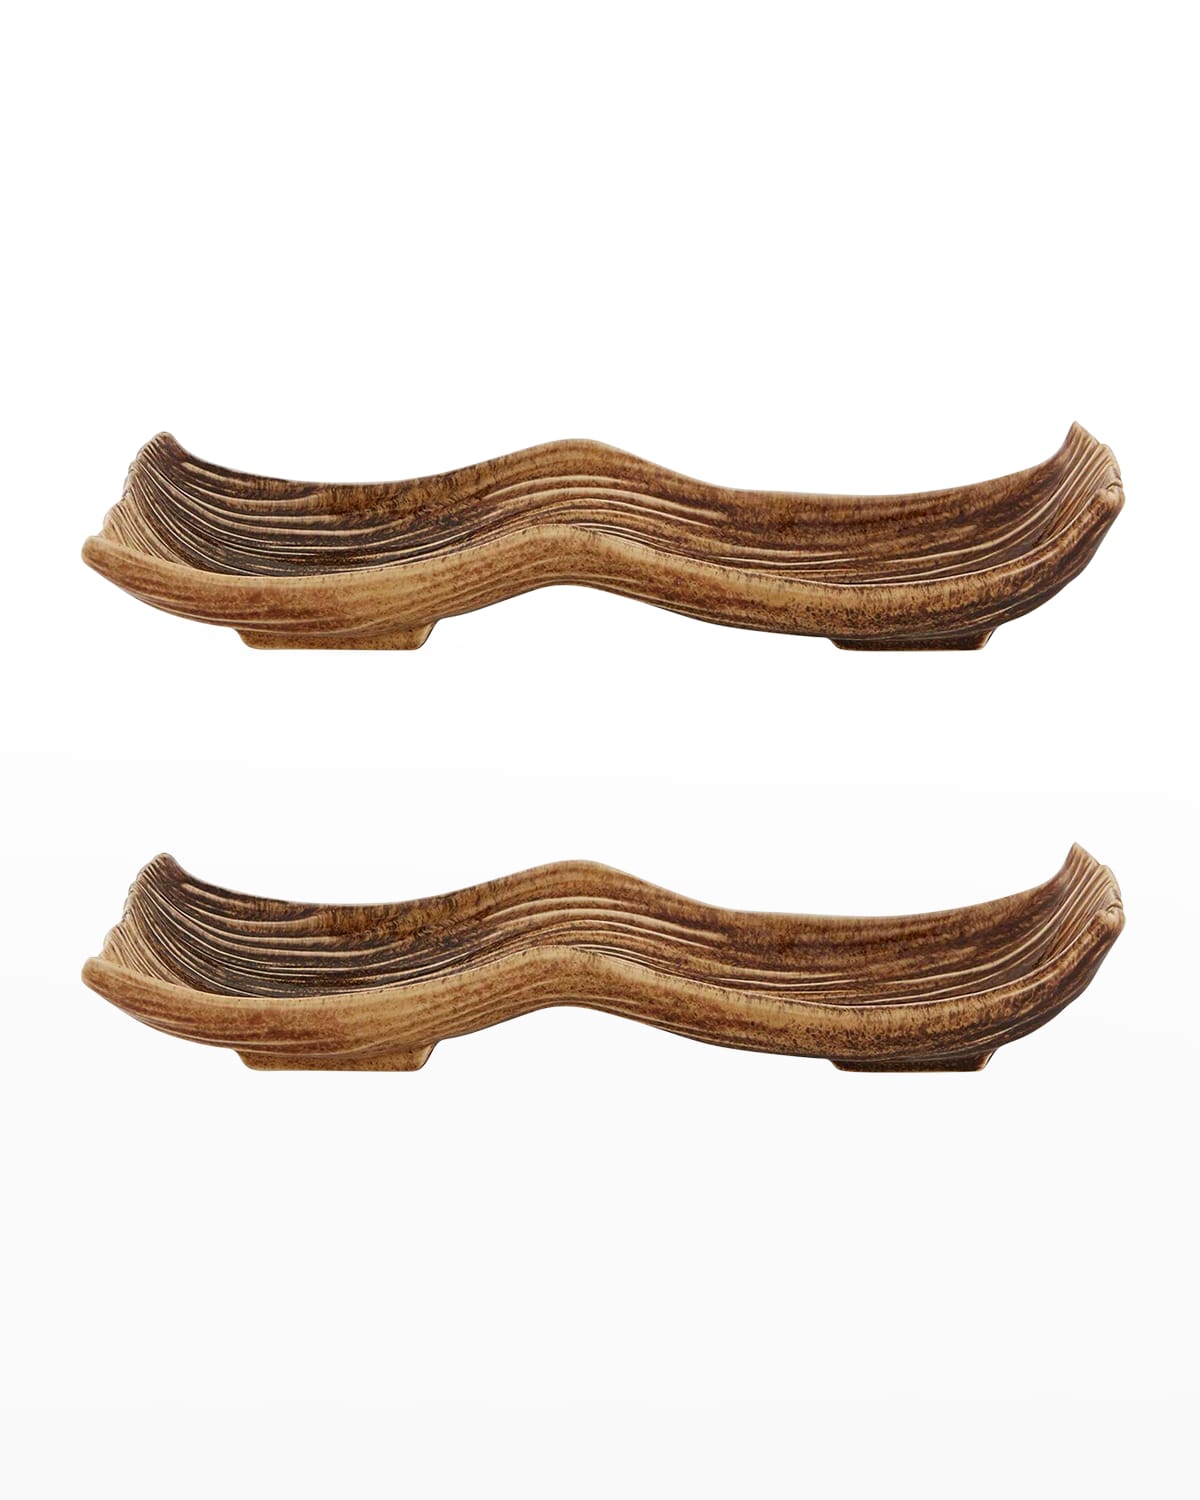 13" Bananas From Madeira Serving Trays, Set of 2